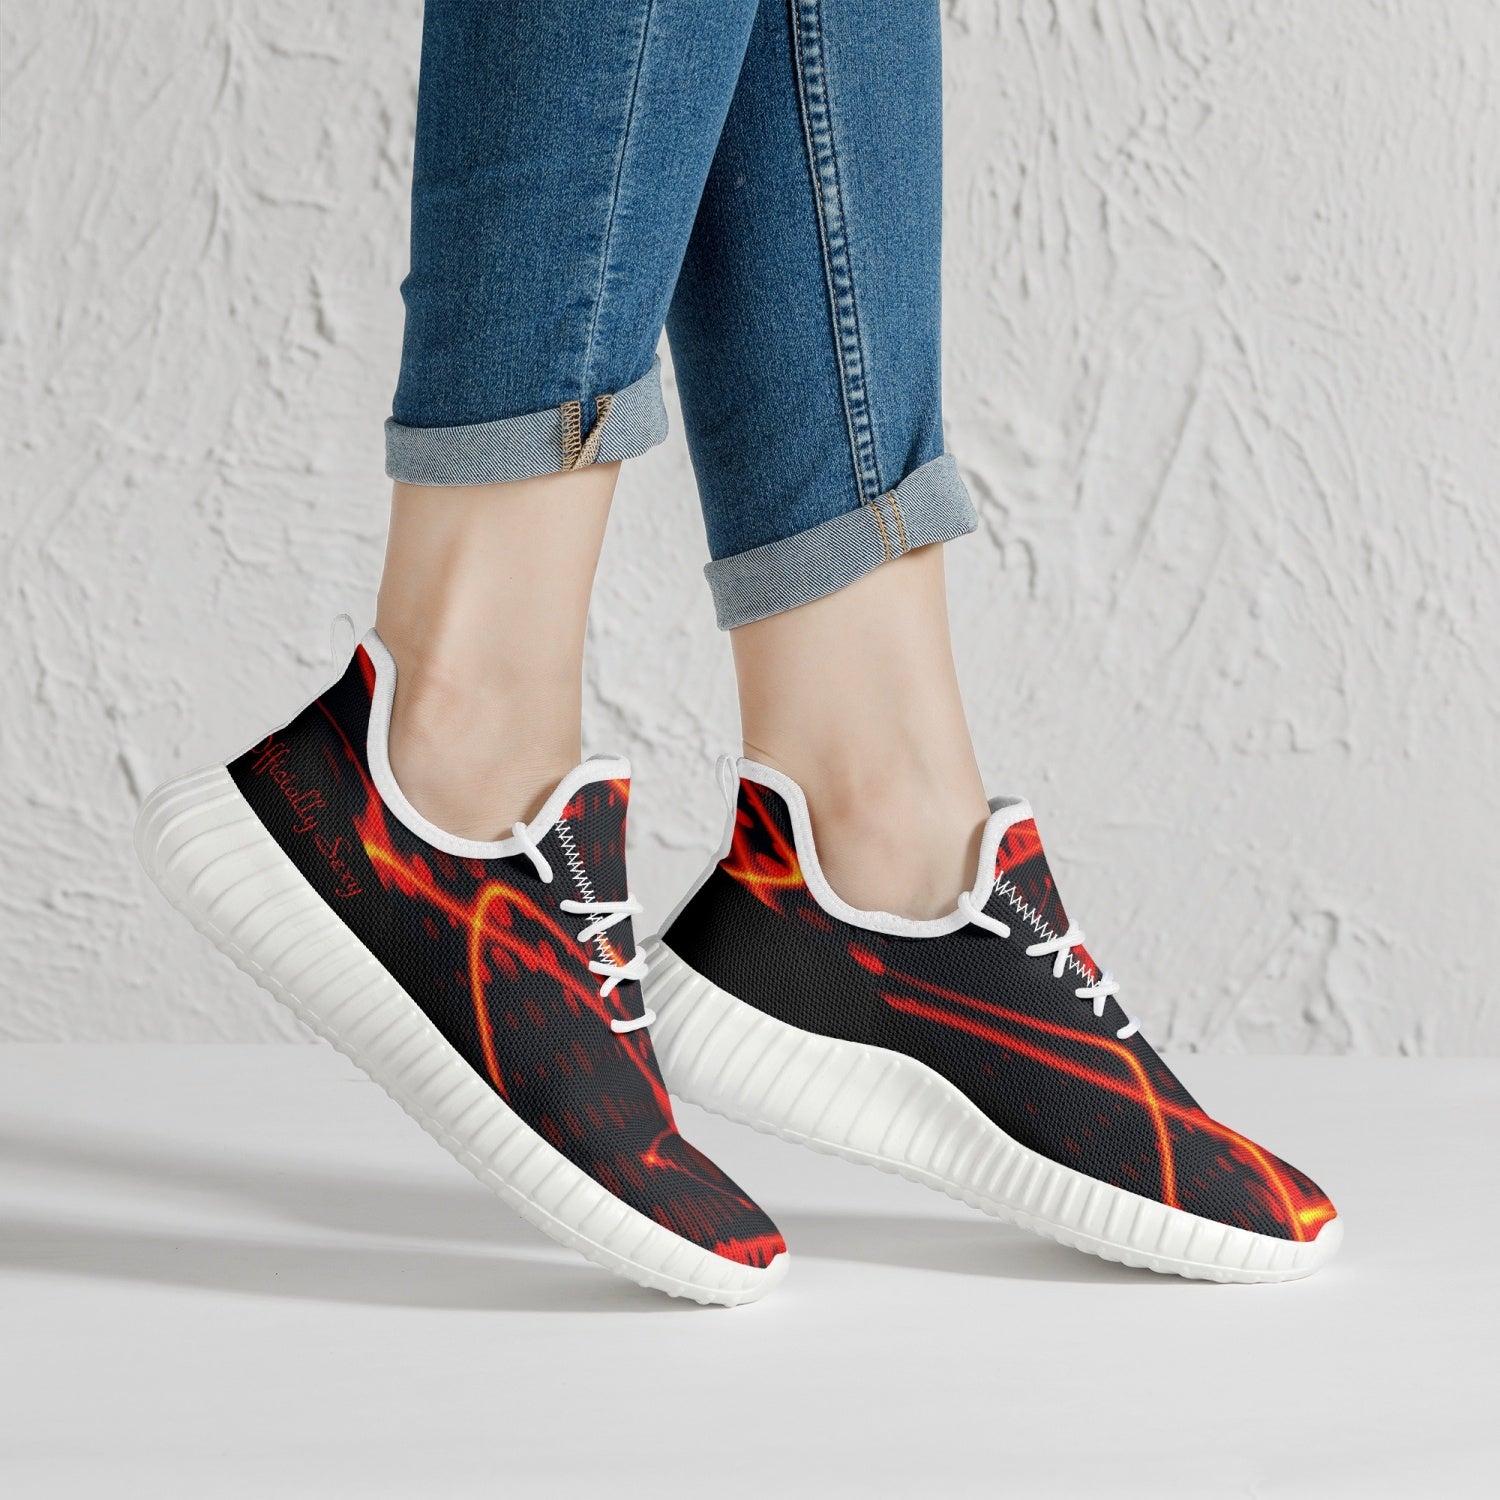 Officially Sexy Orange & Black Laser Print Mesh Knit Sneakers - With White or Black Sole